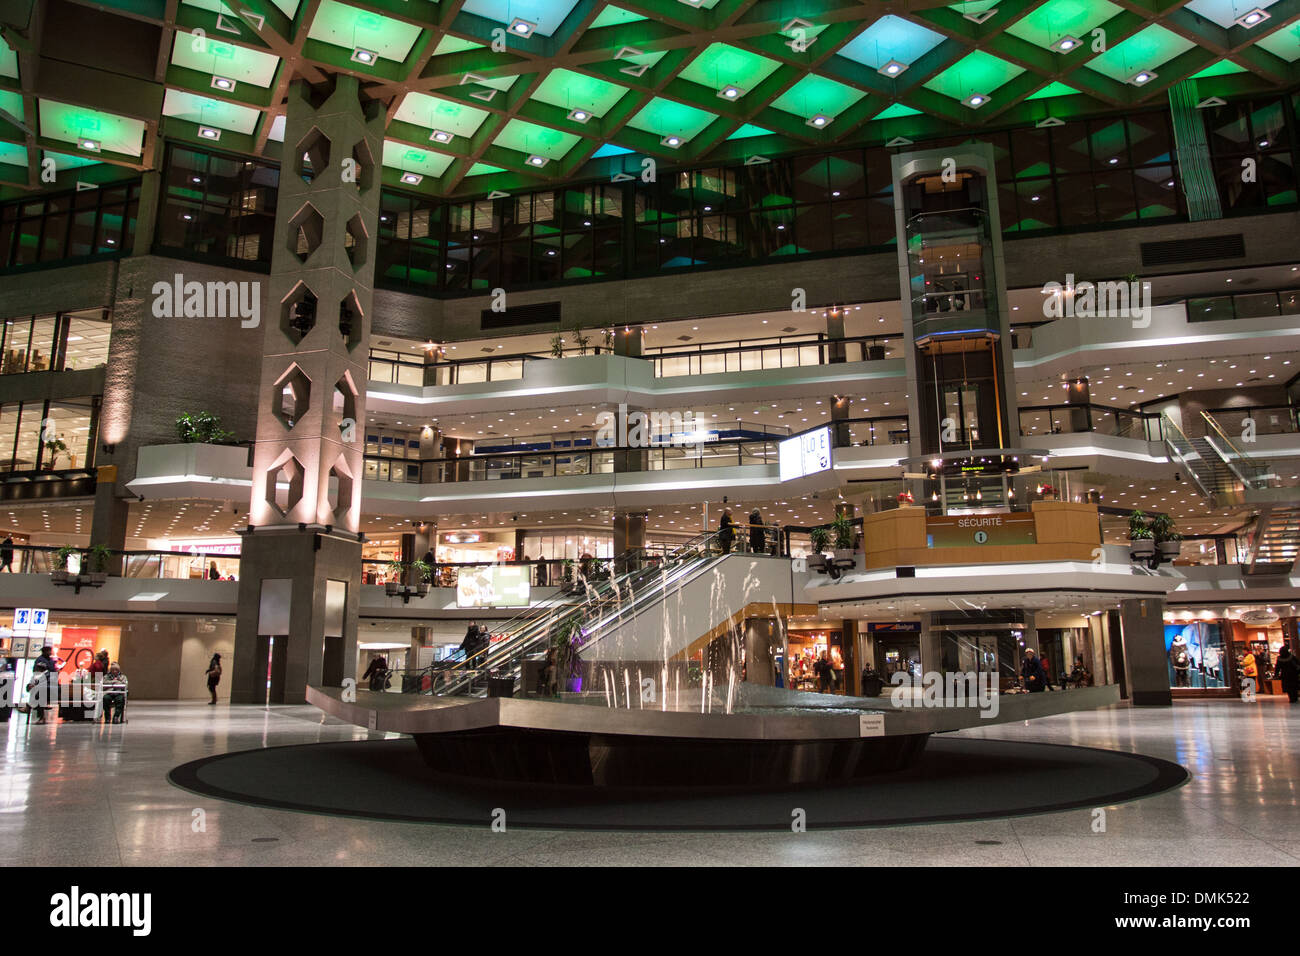 UNDERGROUND CITY NEAR THE PLACE DES ARTS SQUARE, MONTREAL, QUEBEC, CANADA Stock Photo